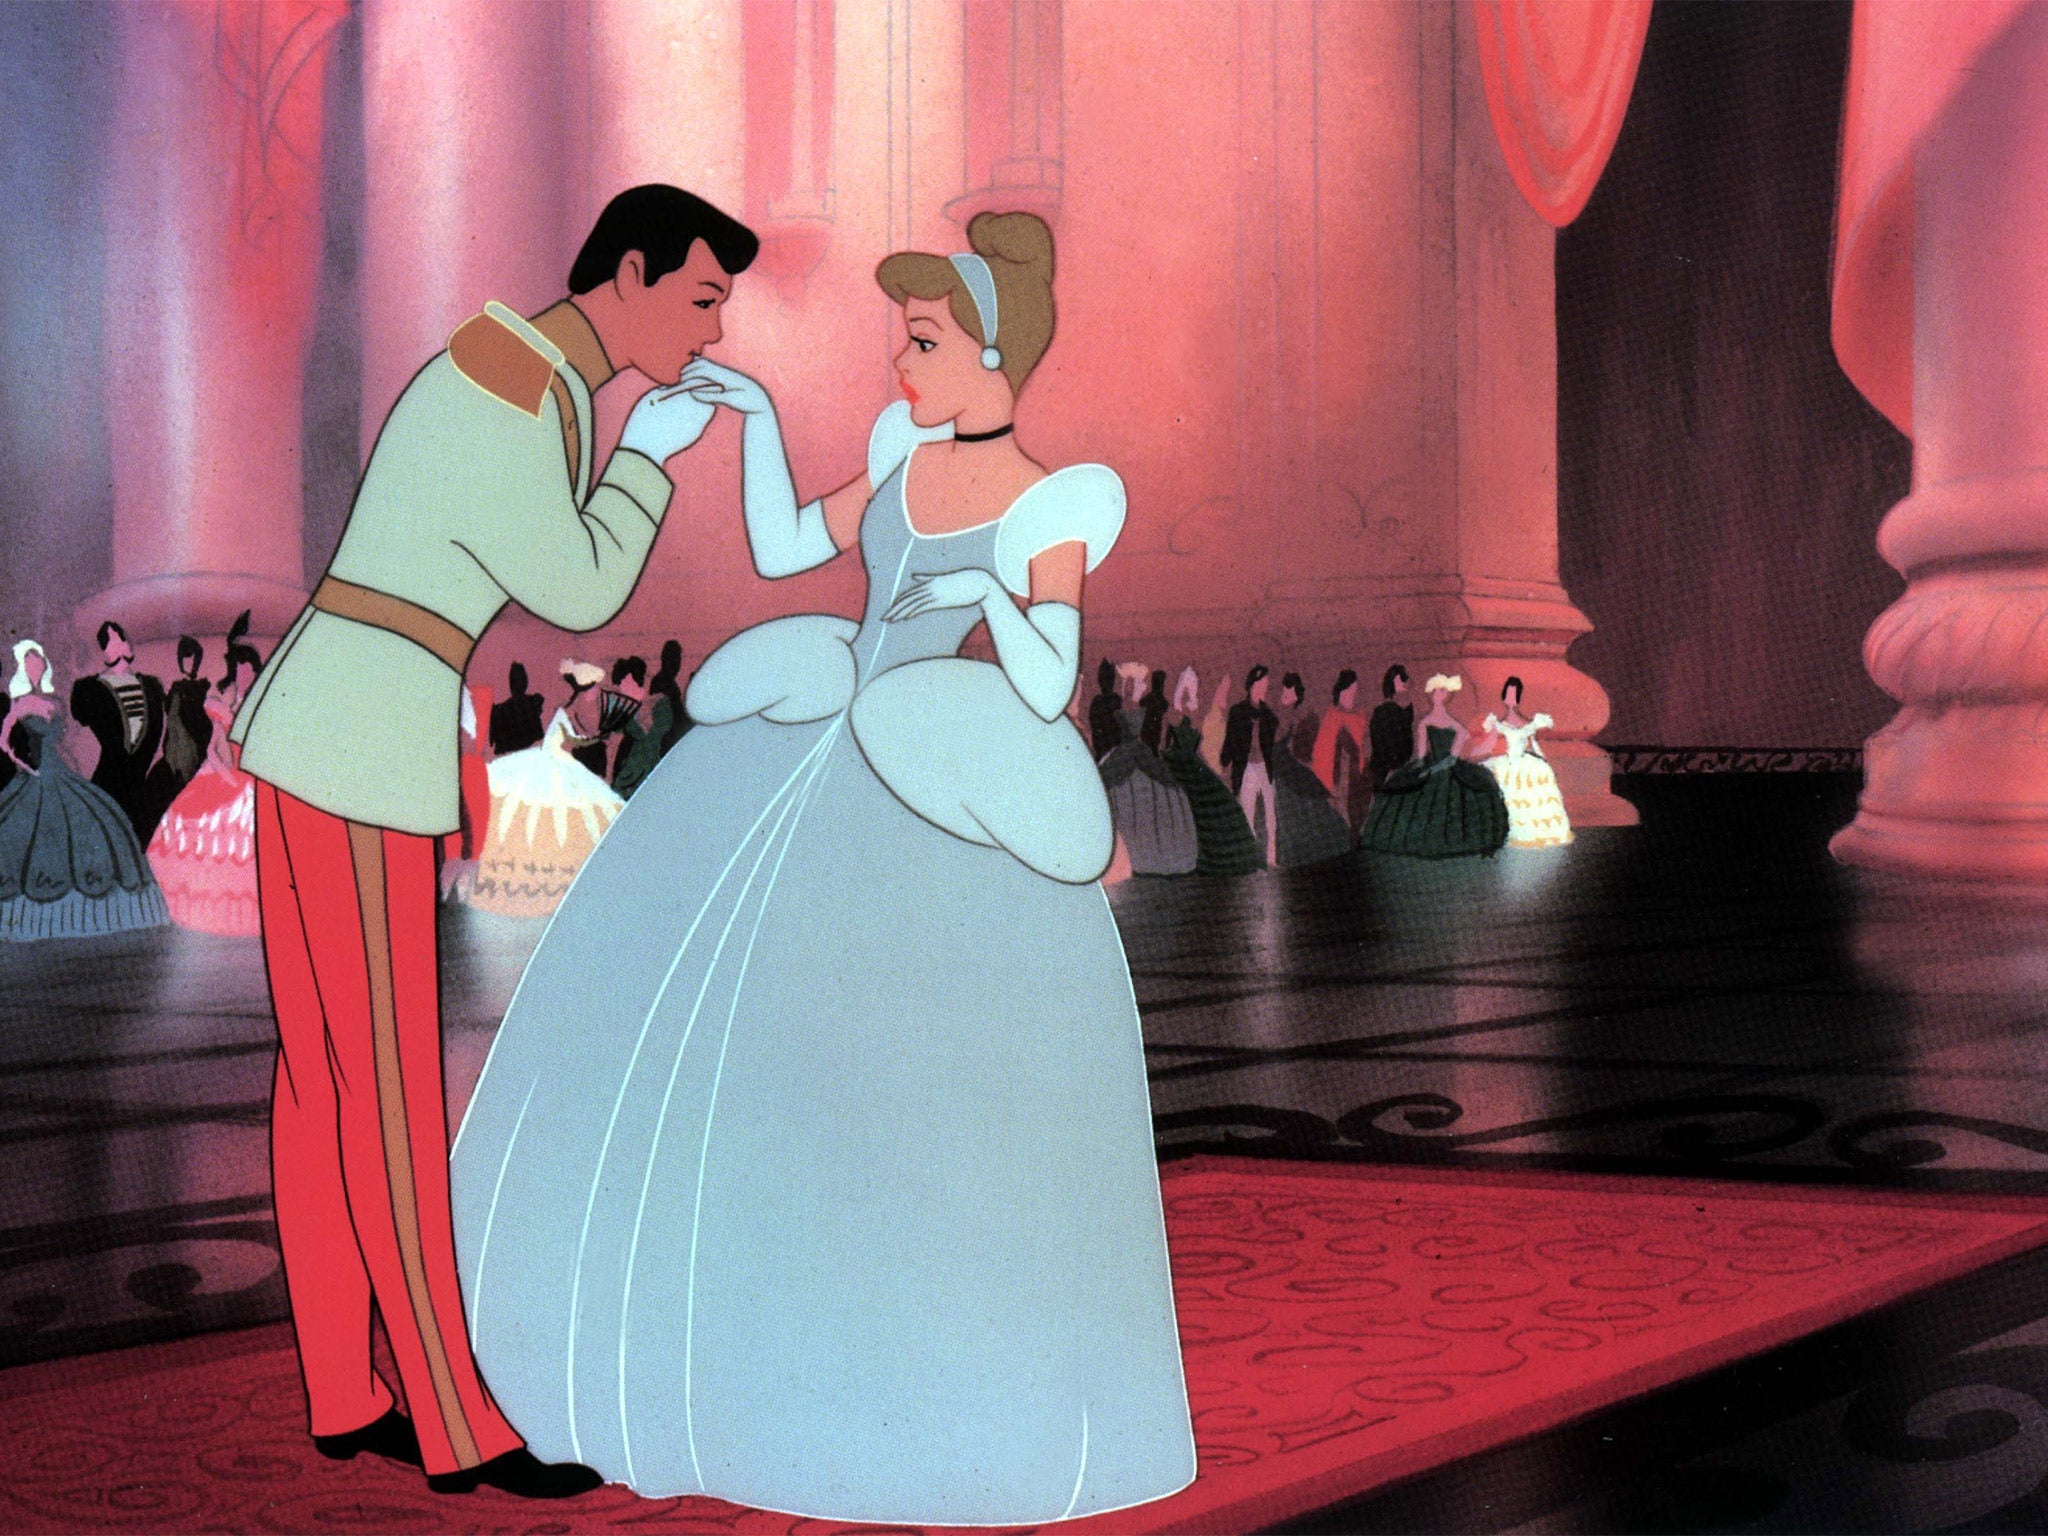 Prince Charming will be the star in a 'revisionist' take on Disney's classic fairytales